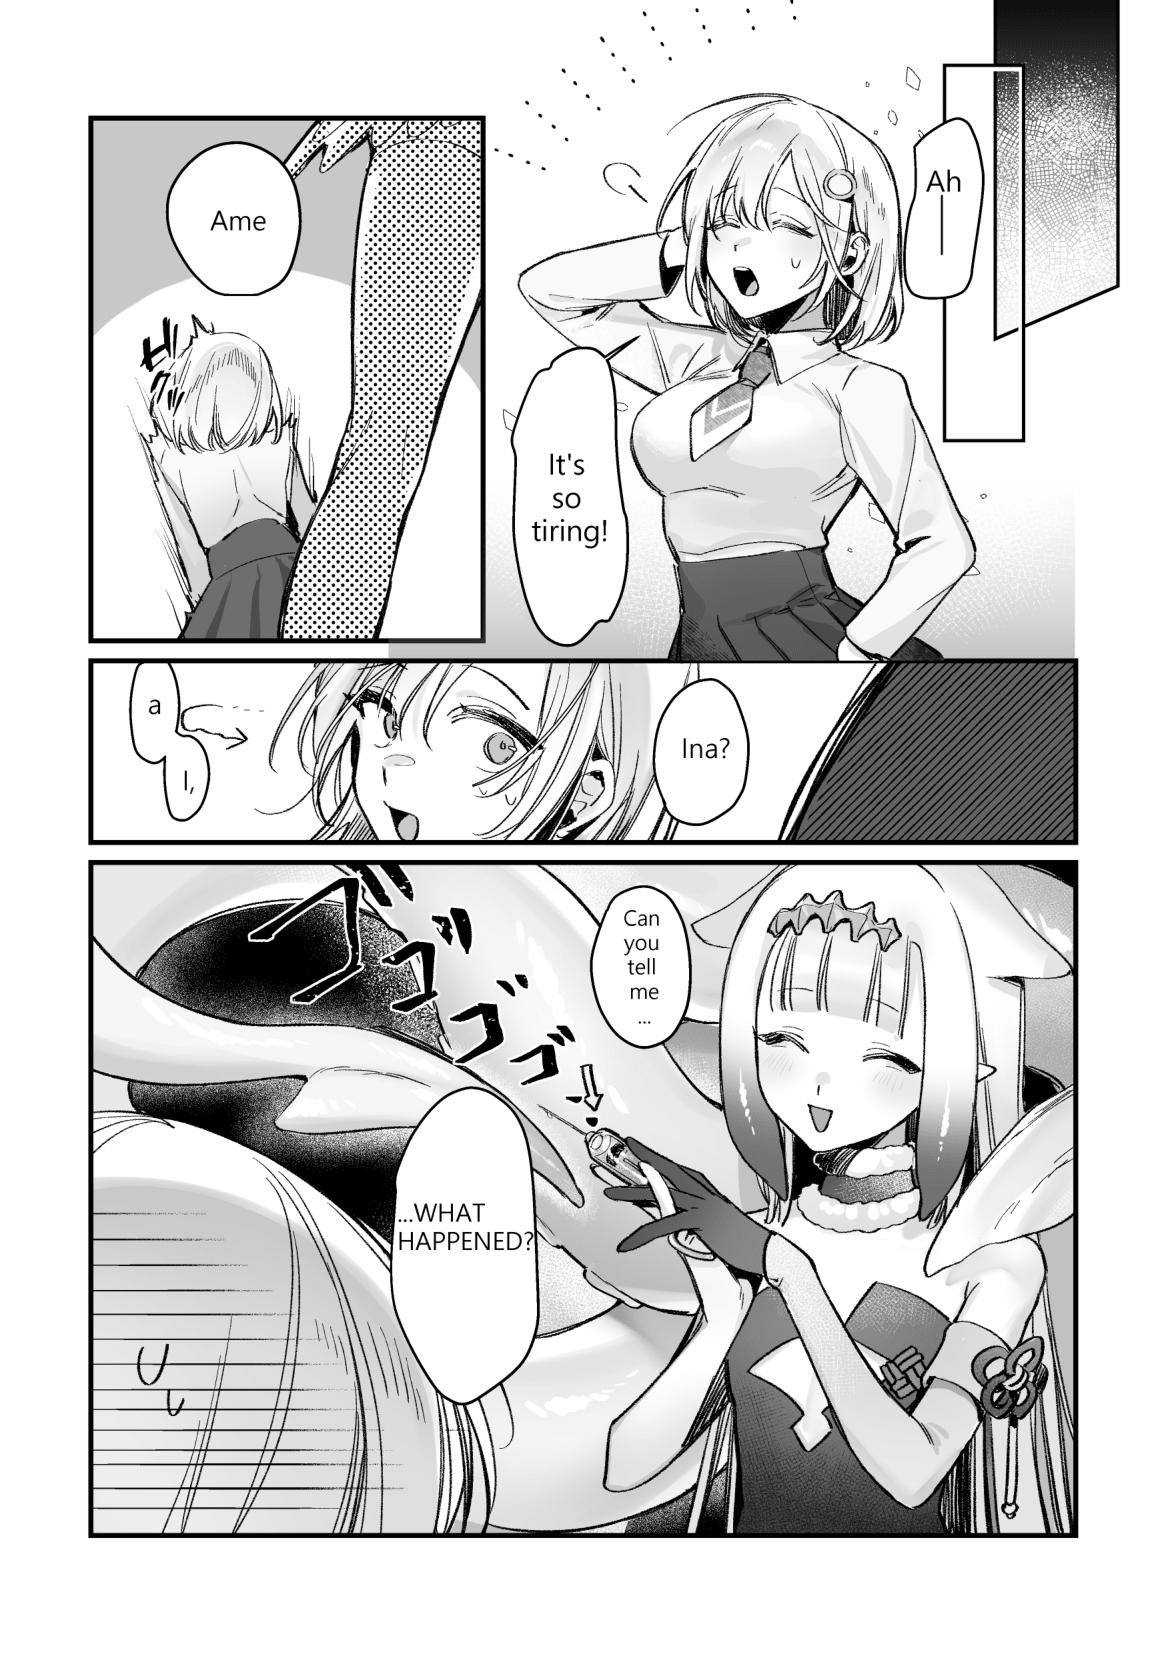 【R-18 Comic】Tentacle!! Ina's Boing Boing is out of control!! 17